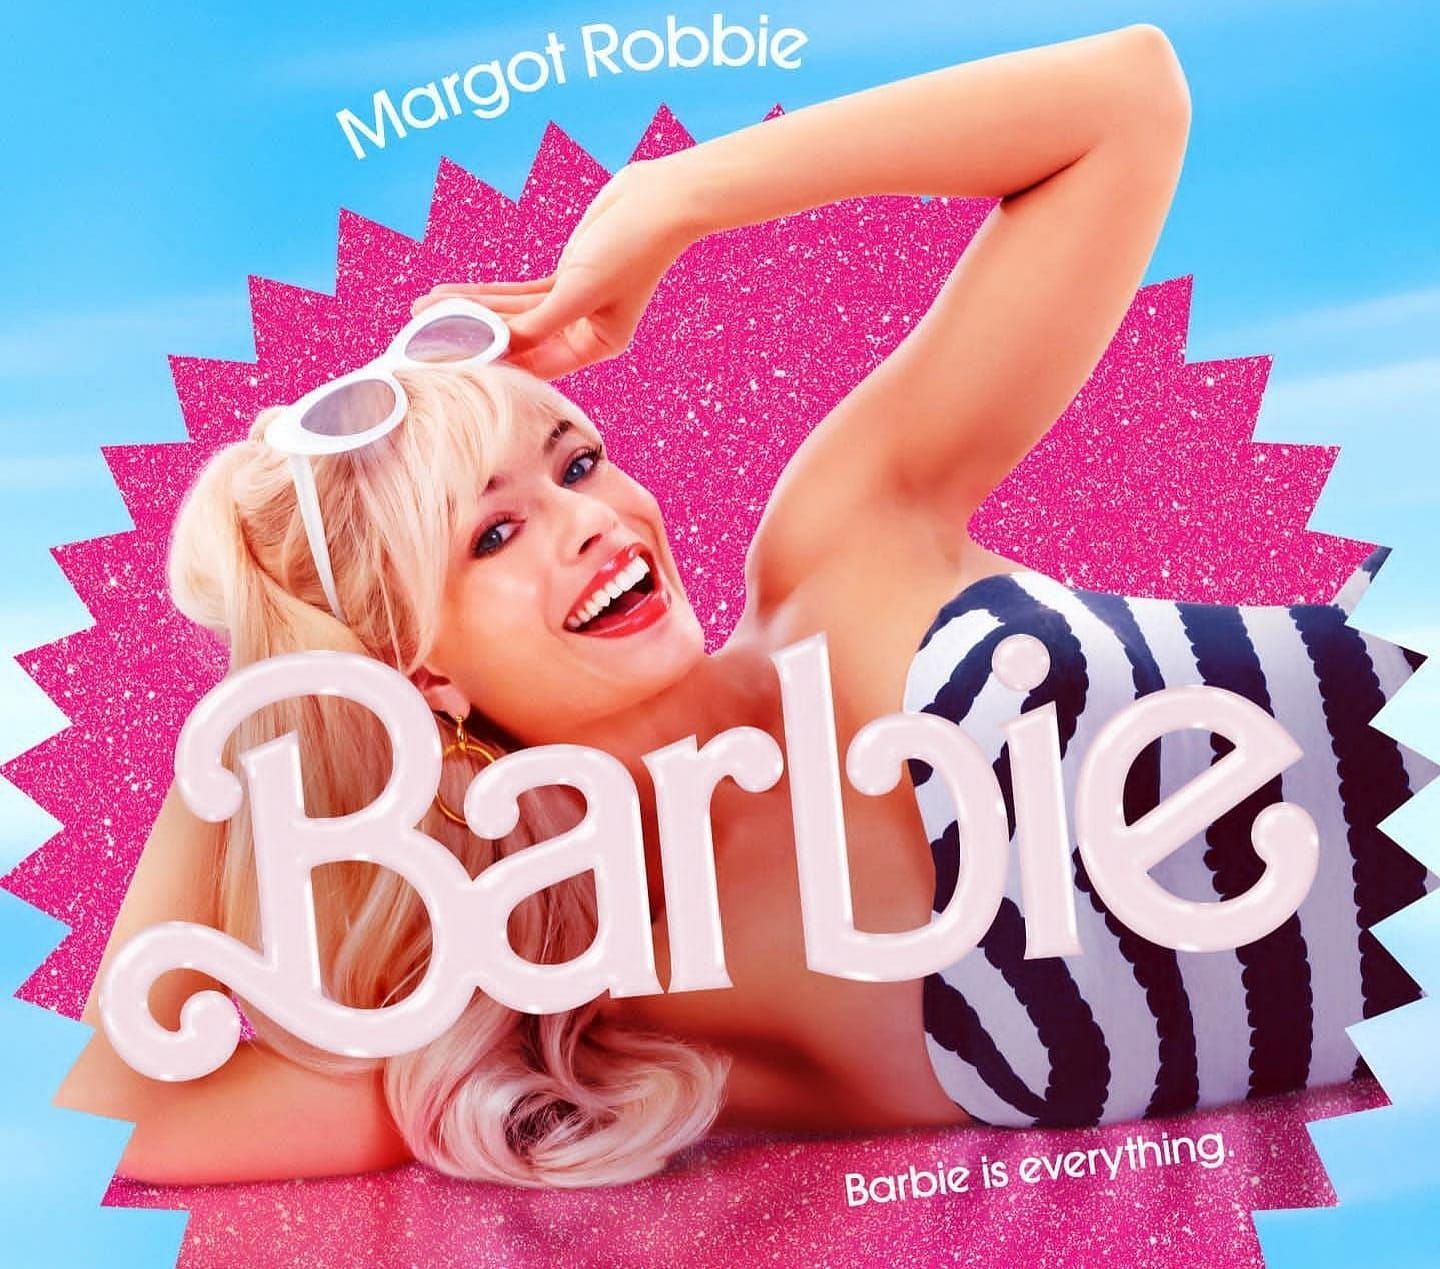 What is the film Barbie all about?